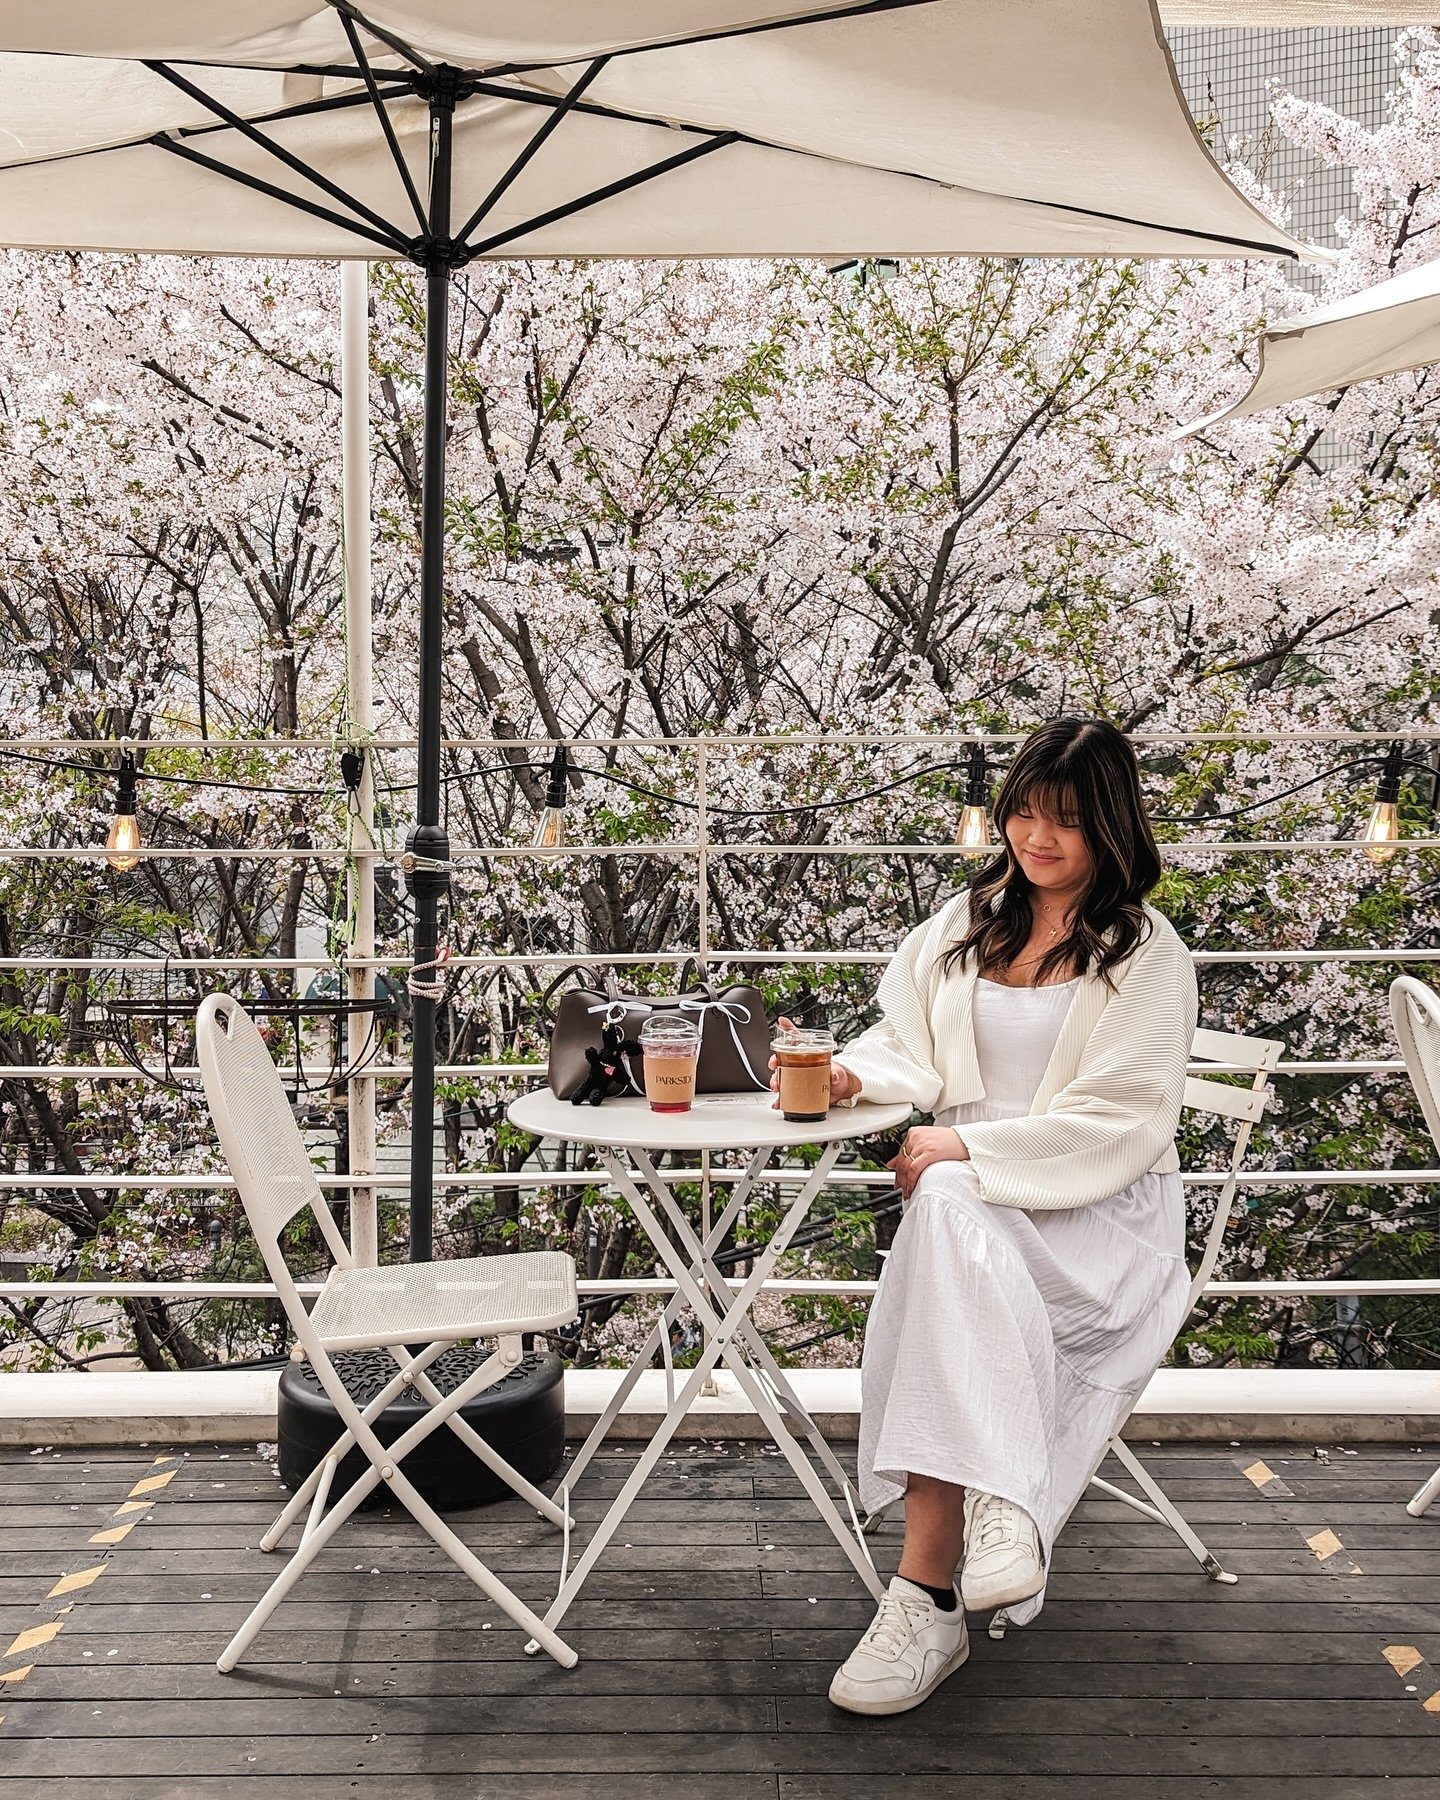 Just another beautiful cafe among the cherry blossoms. 🌸💕 This seat turns into a photo zone during cherry blossom season, but we were also lucky and there weren&rsquo;t many people who came at opening time so we had the area mostly to ourselves. 🤭